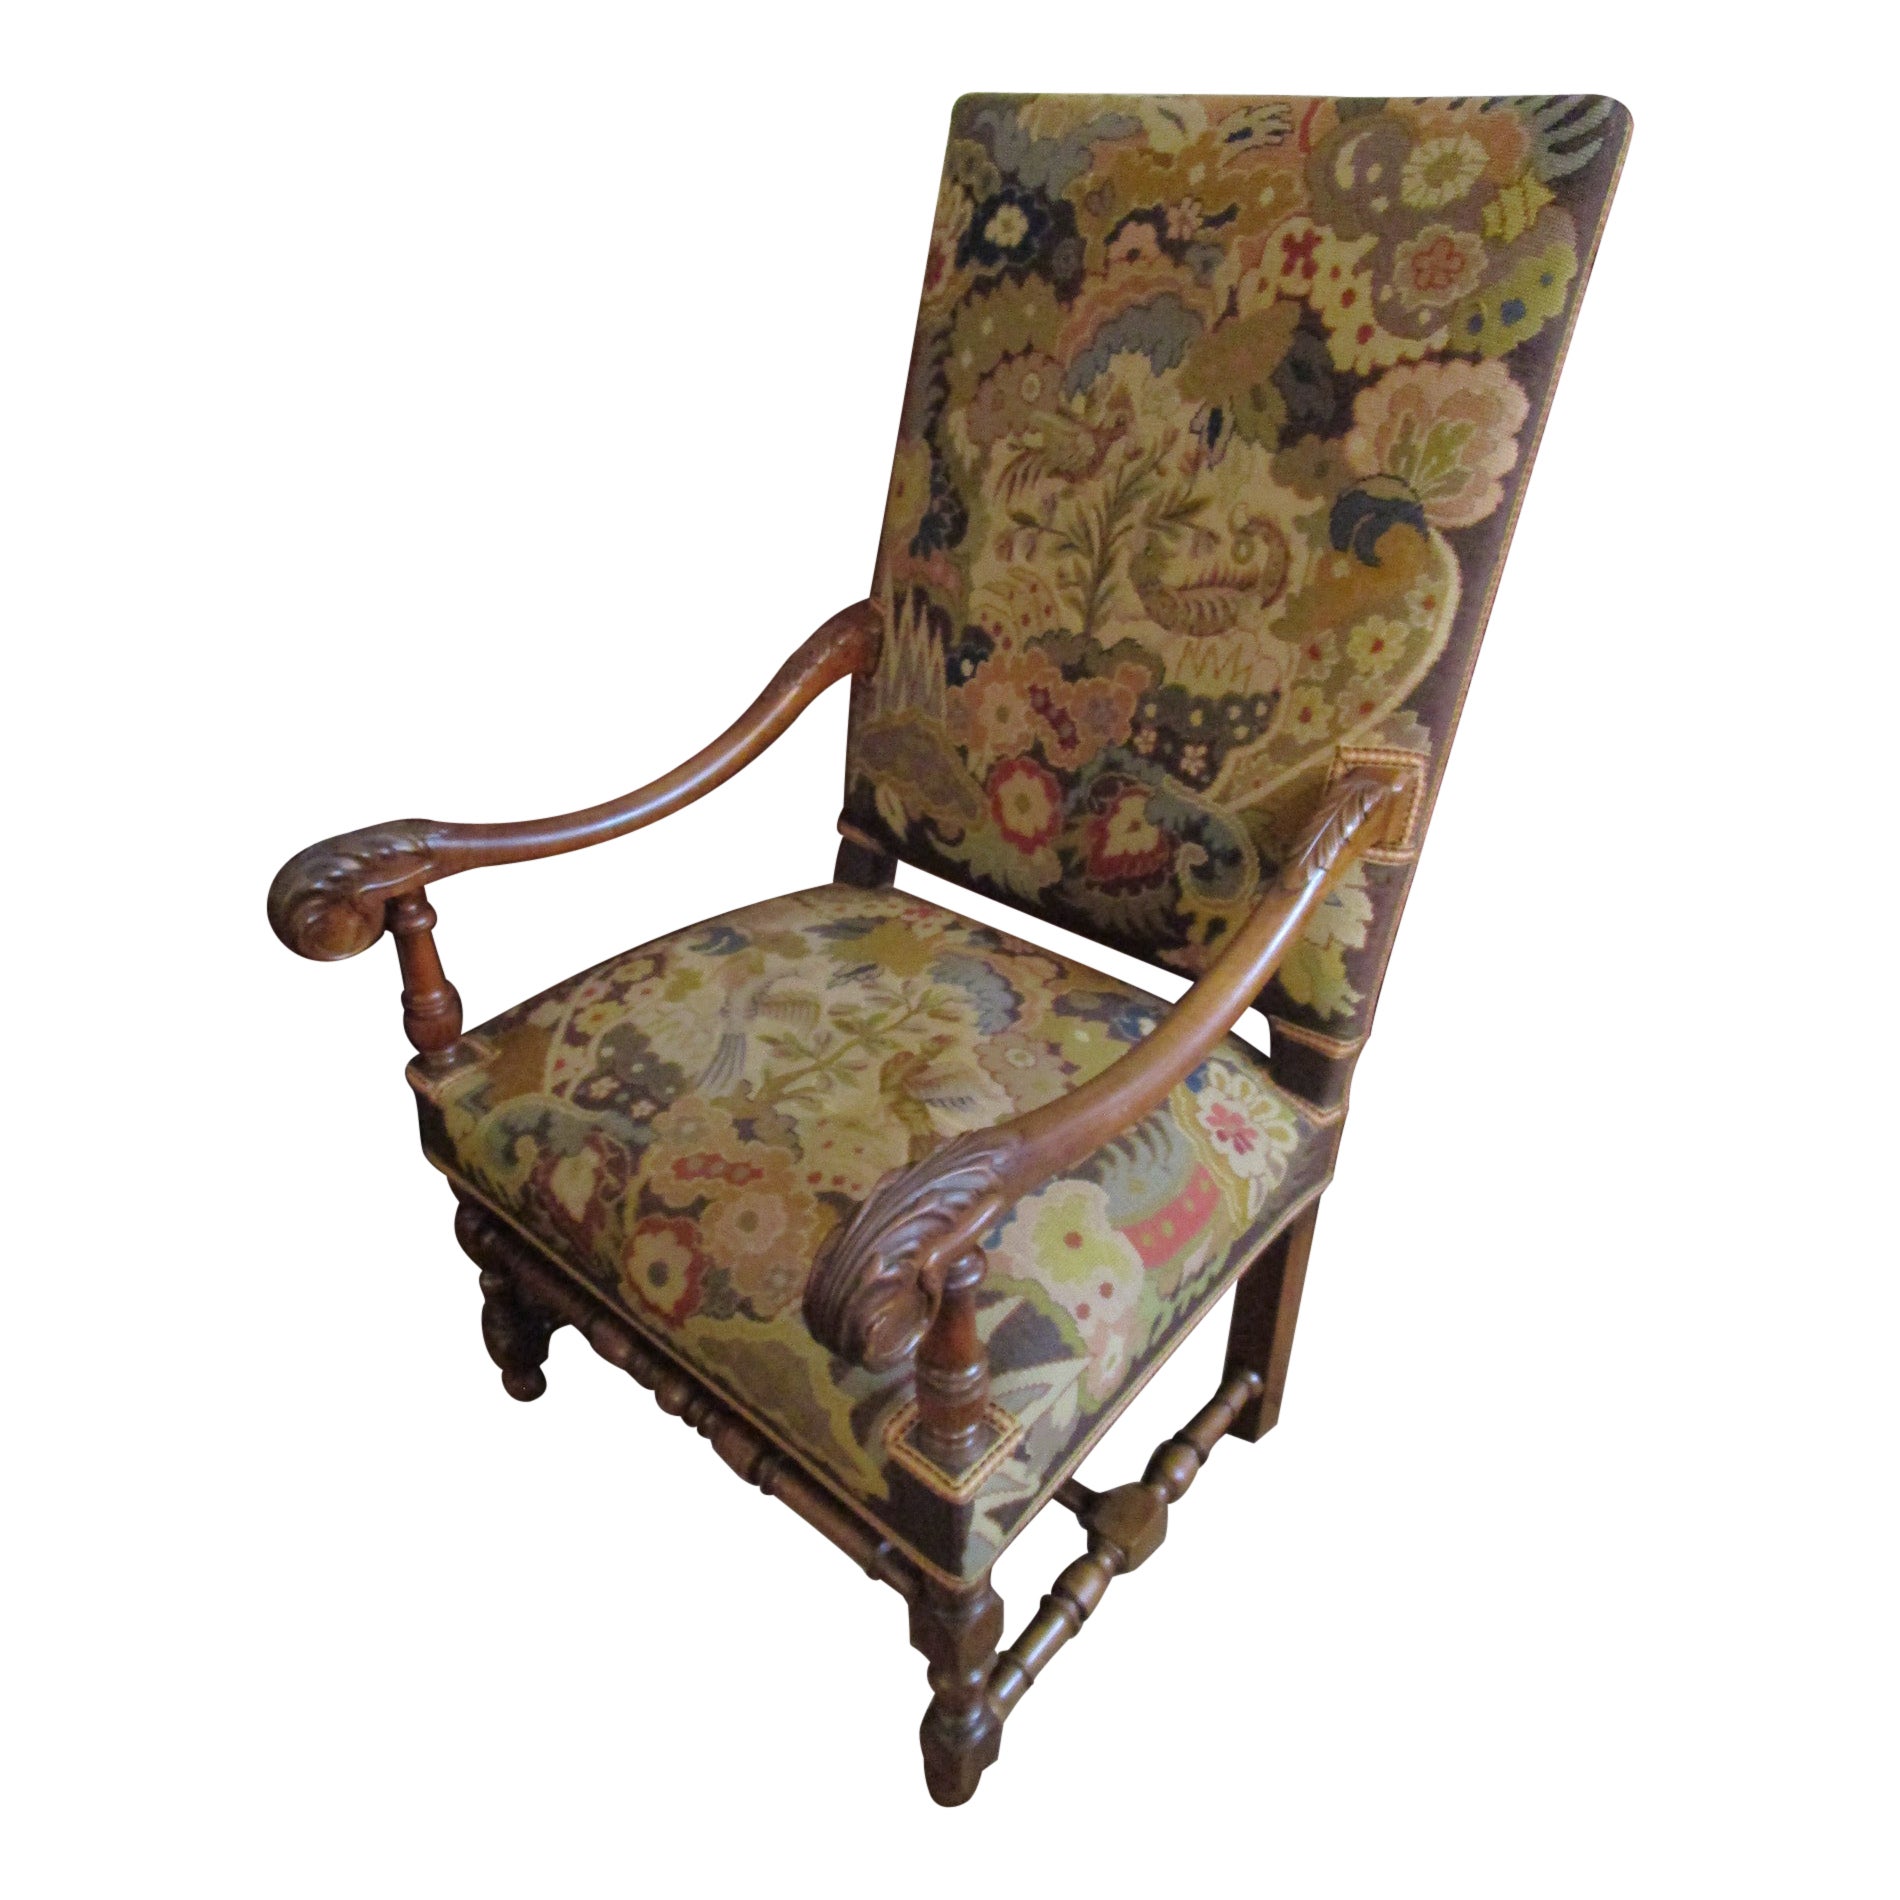 19thc English Armchair w/Acanthus Leaf Carving & Needle & Petit Point Upholstery